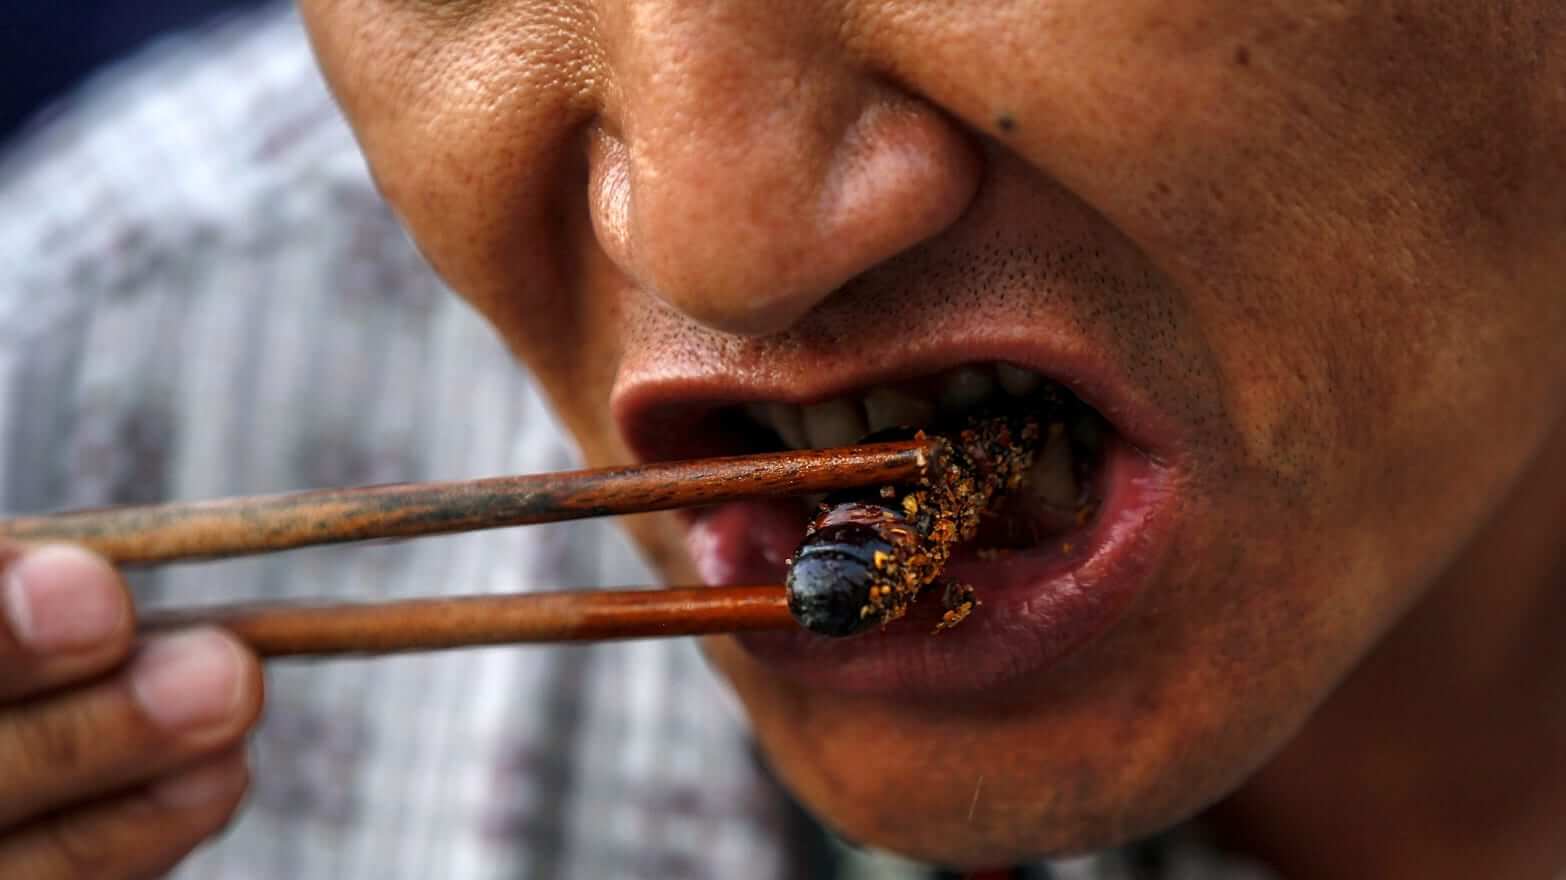 Could Eating Bugs Lead To A Powerful Race That Can Outlive Others?